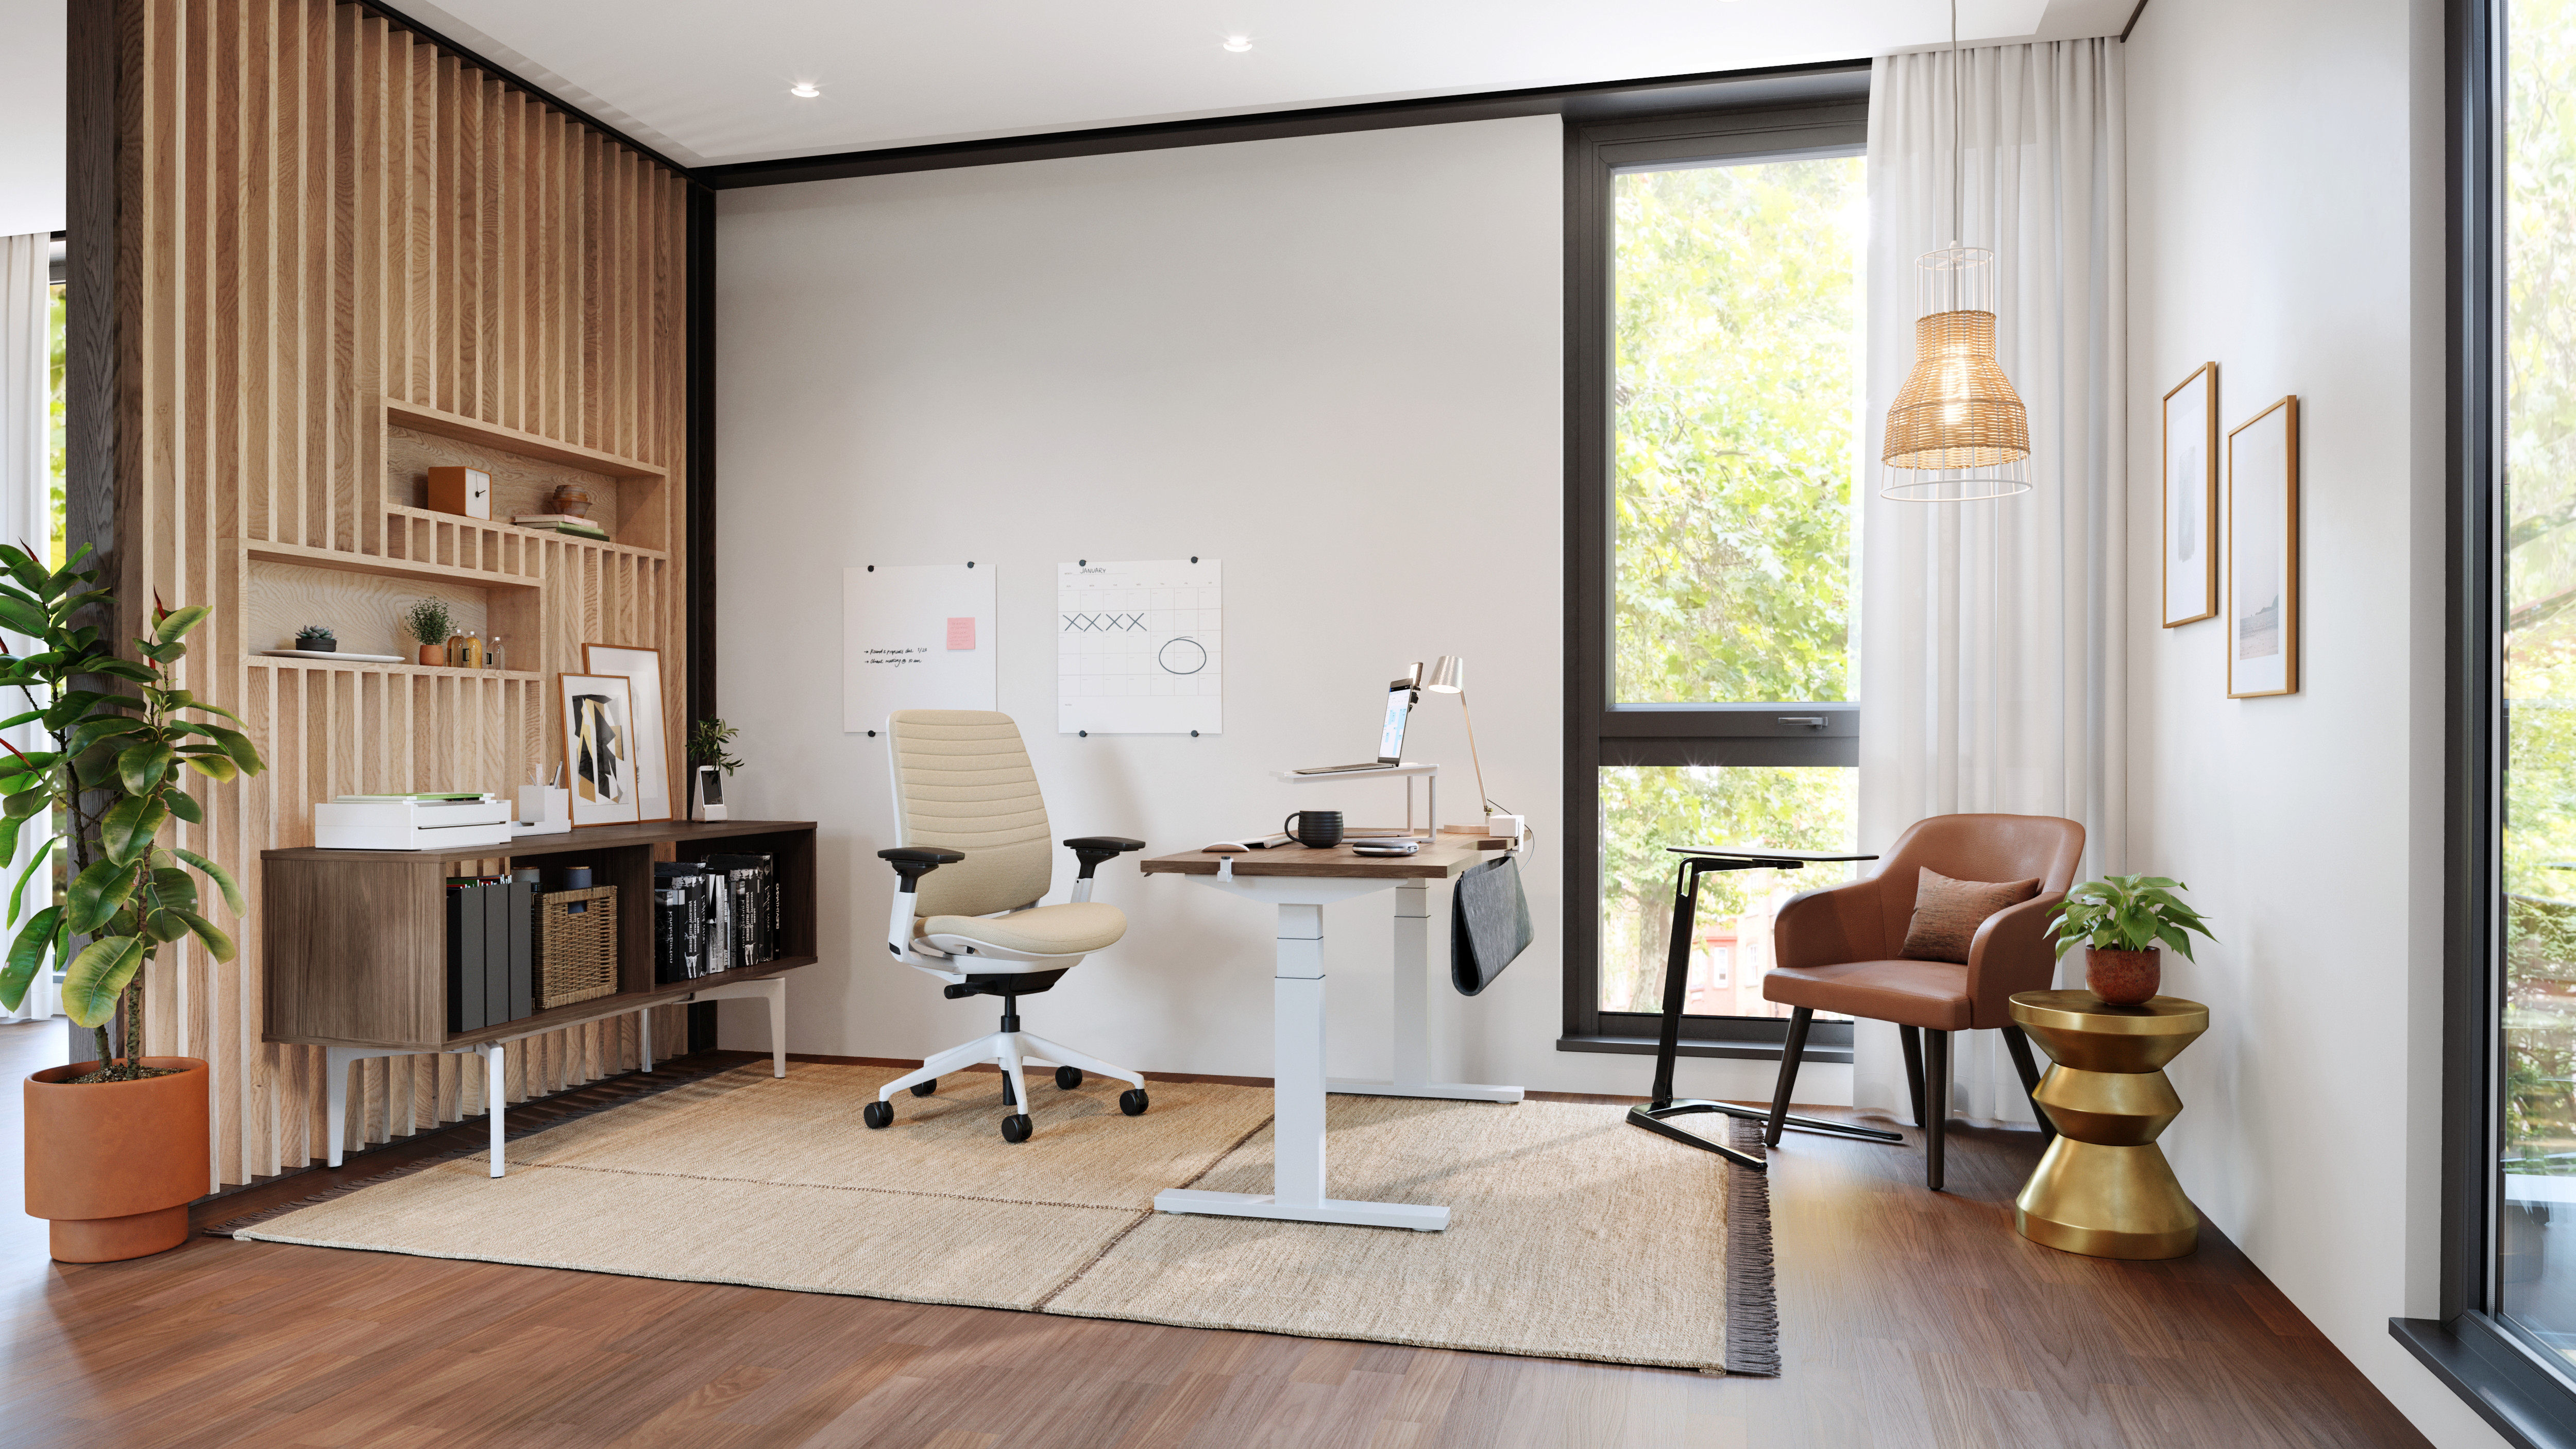 How to Upgrade Your Home’s Electrical System for a Home Office